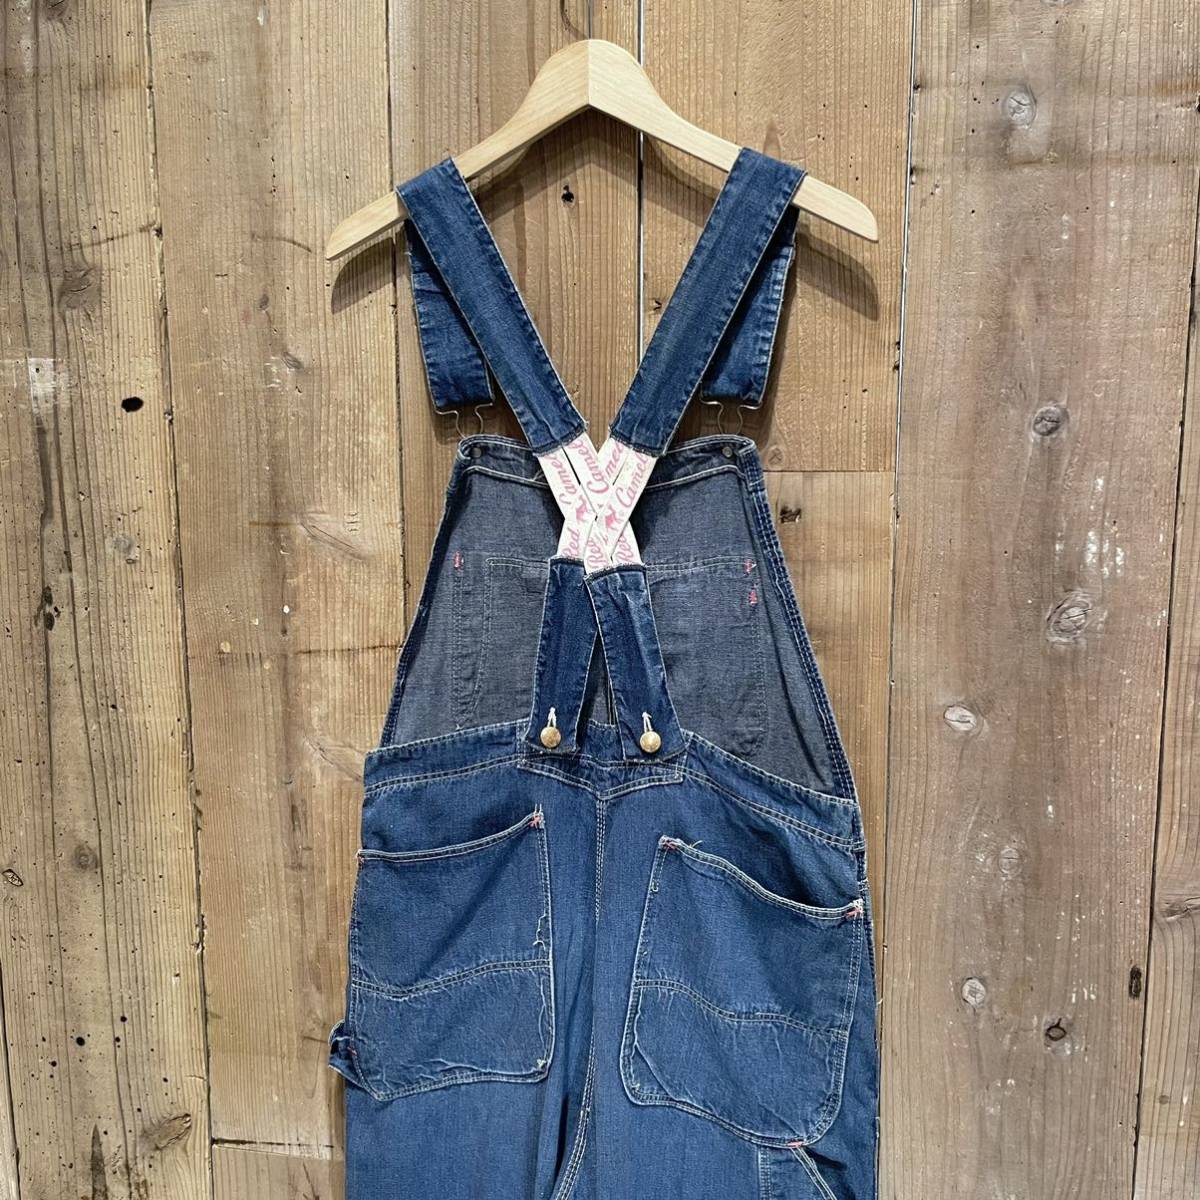 [ size S M]50s 60s USA made RED CAMEL Vintage Denim overall America old clothes 40s 70s red Camel Work lady's 